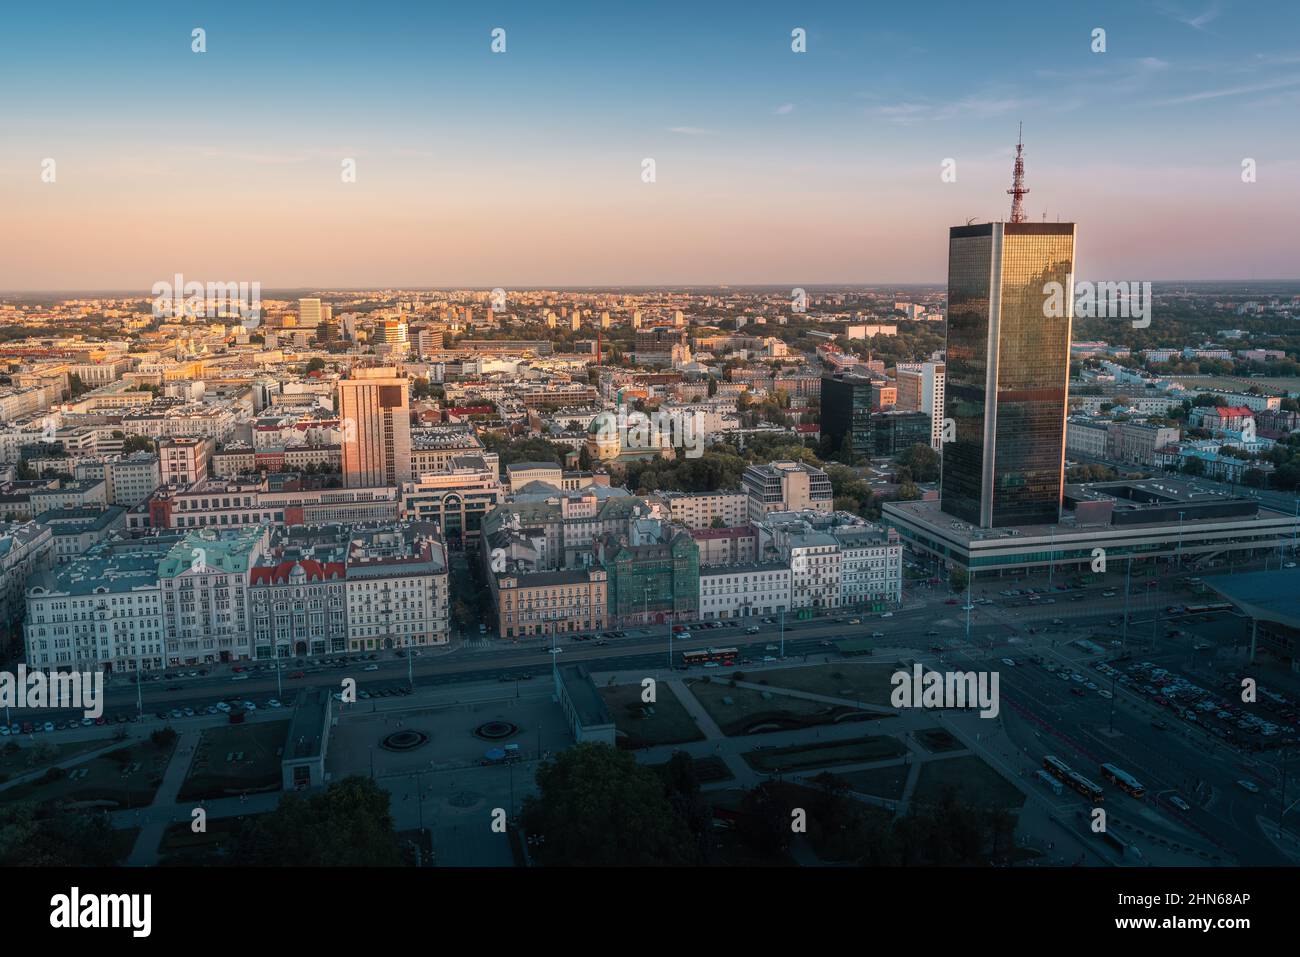 Aerial view of Warsaw city at sunset - Warsaw, Poland Stock Photo